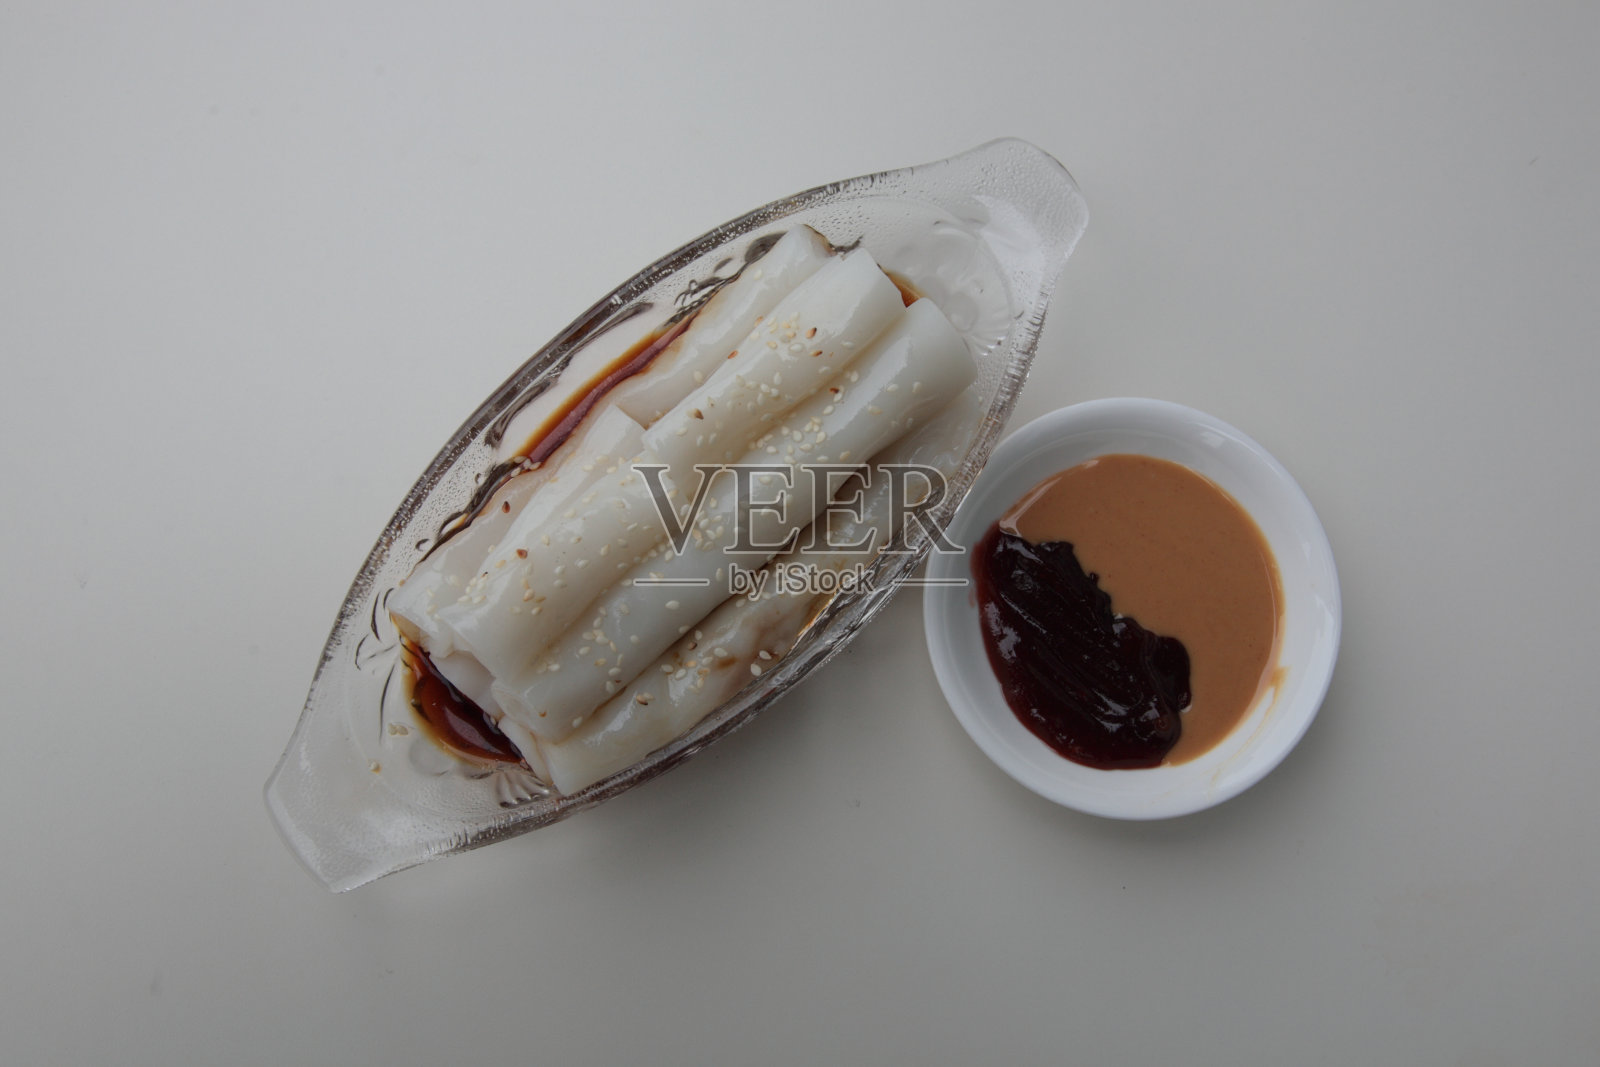 steamed rice noodle roll with vegetable  (斋肠粉)照片摄影图片